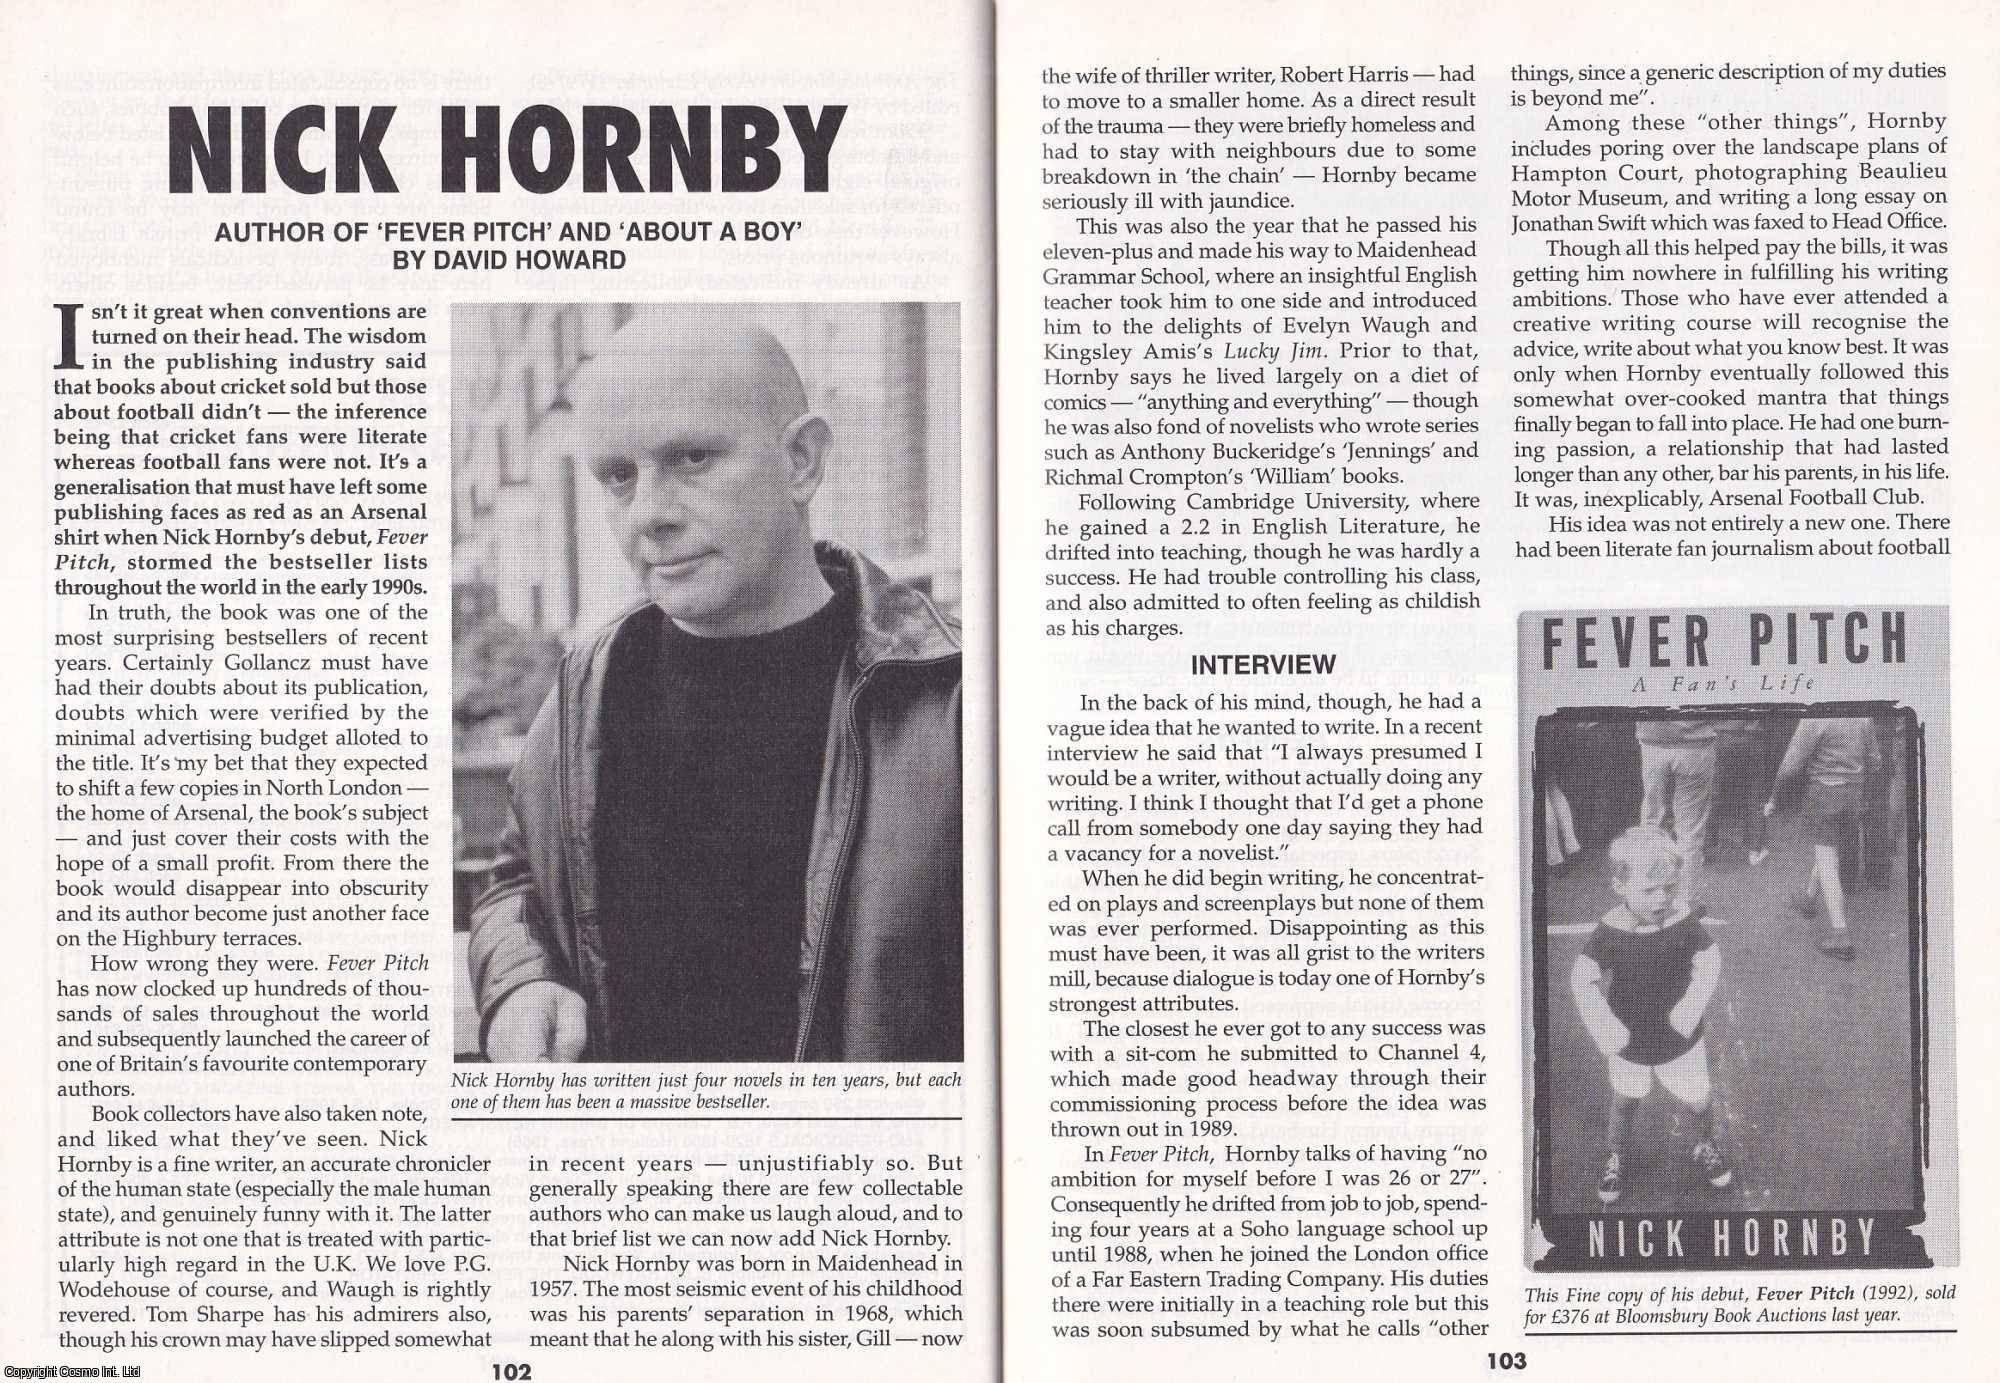 David Howard - Nick Hornby. Author of Fever Pitch. This is an original article separated from an issue of The Book & Magazine Collector publication, 2003.